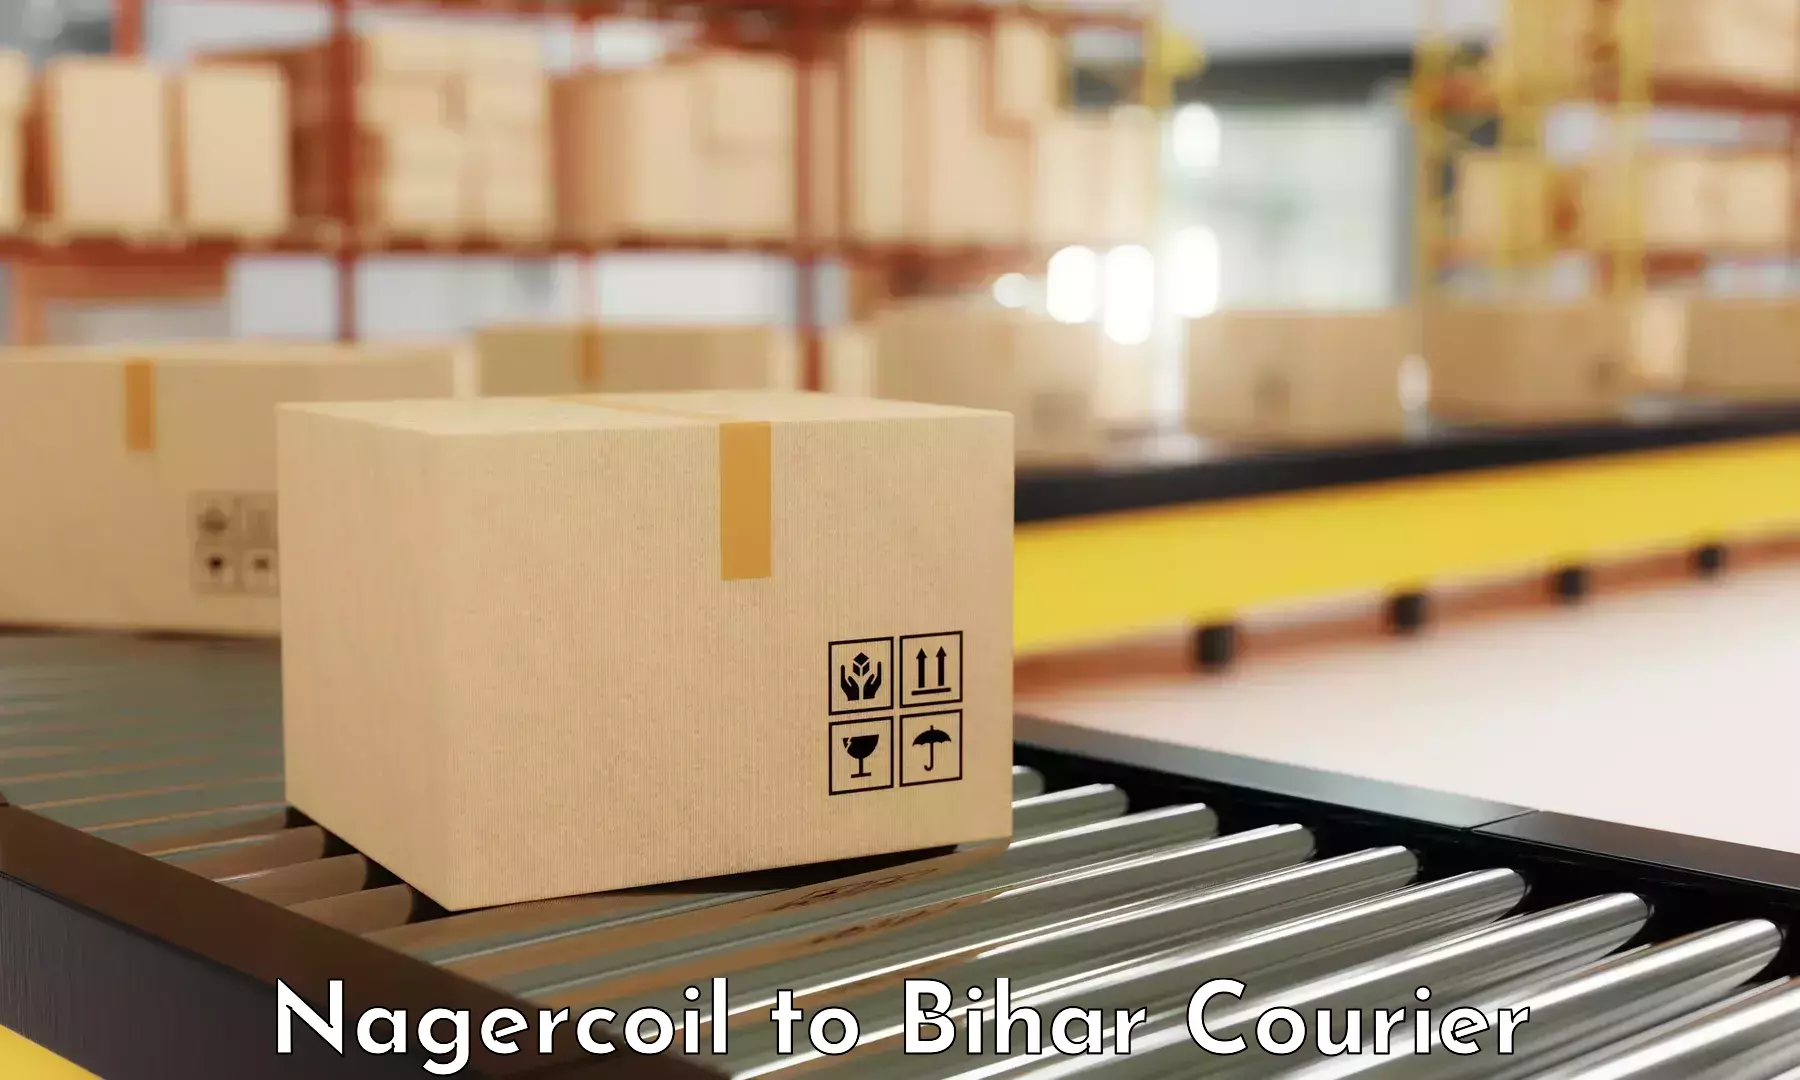 Affordable parcel service Nagercoil to Bettiah